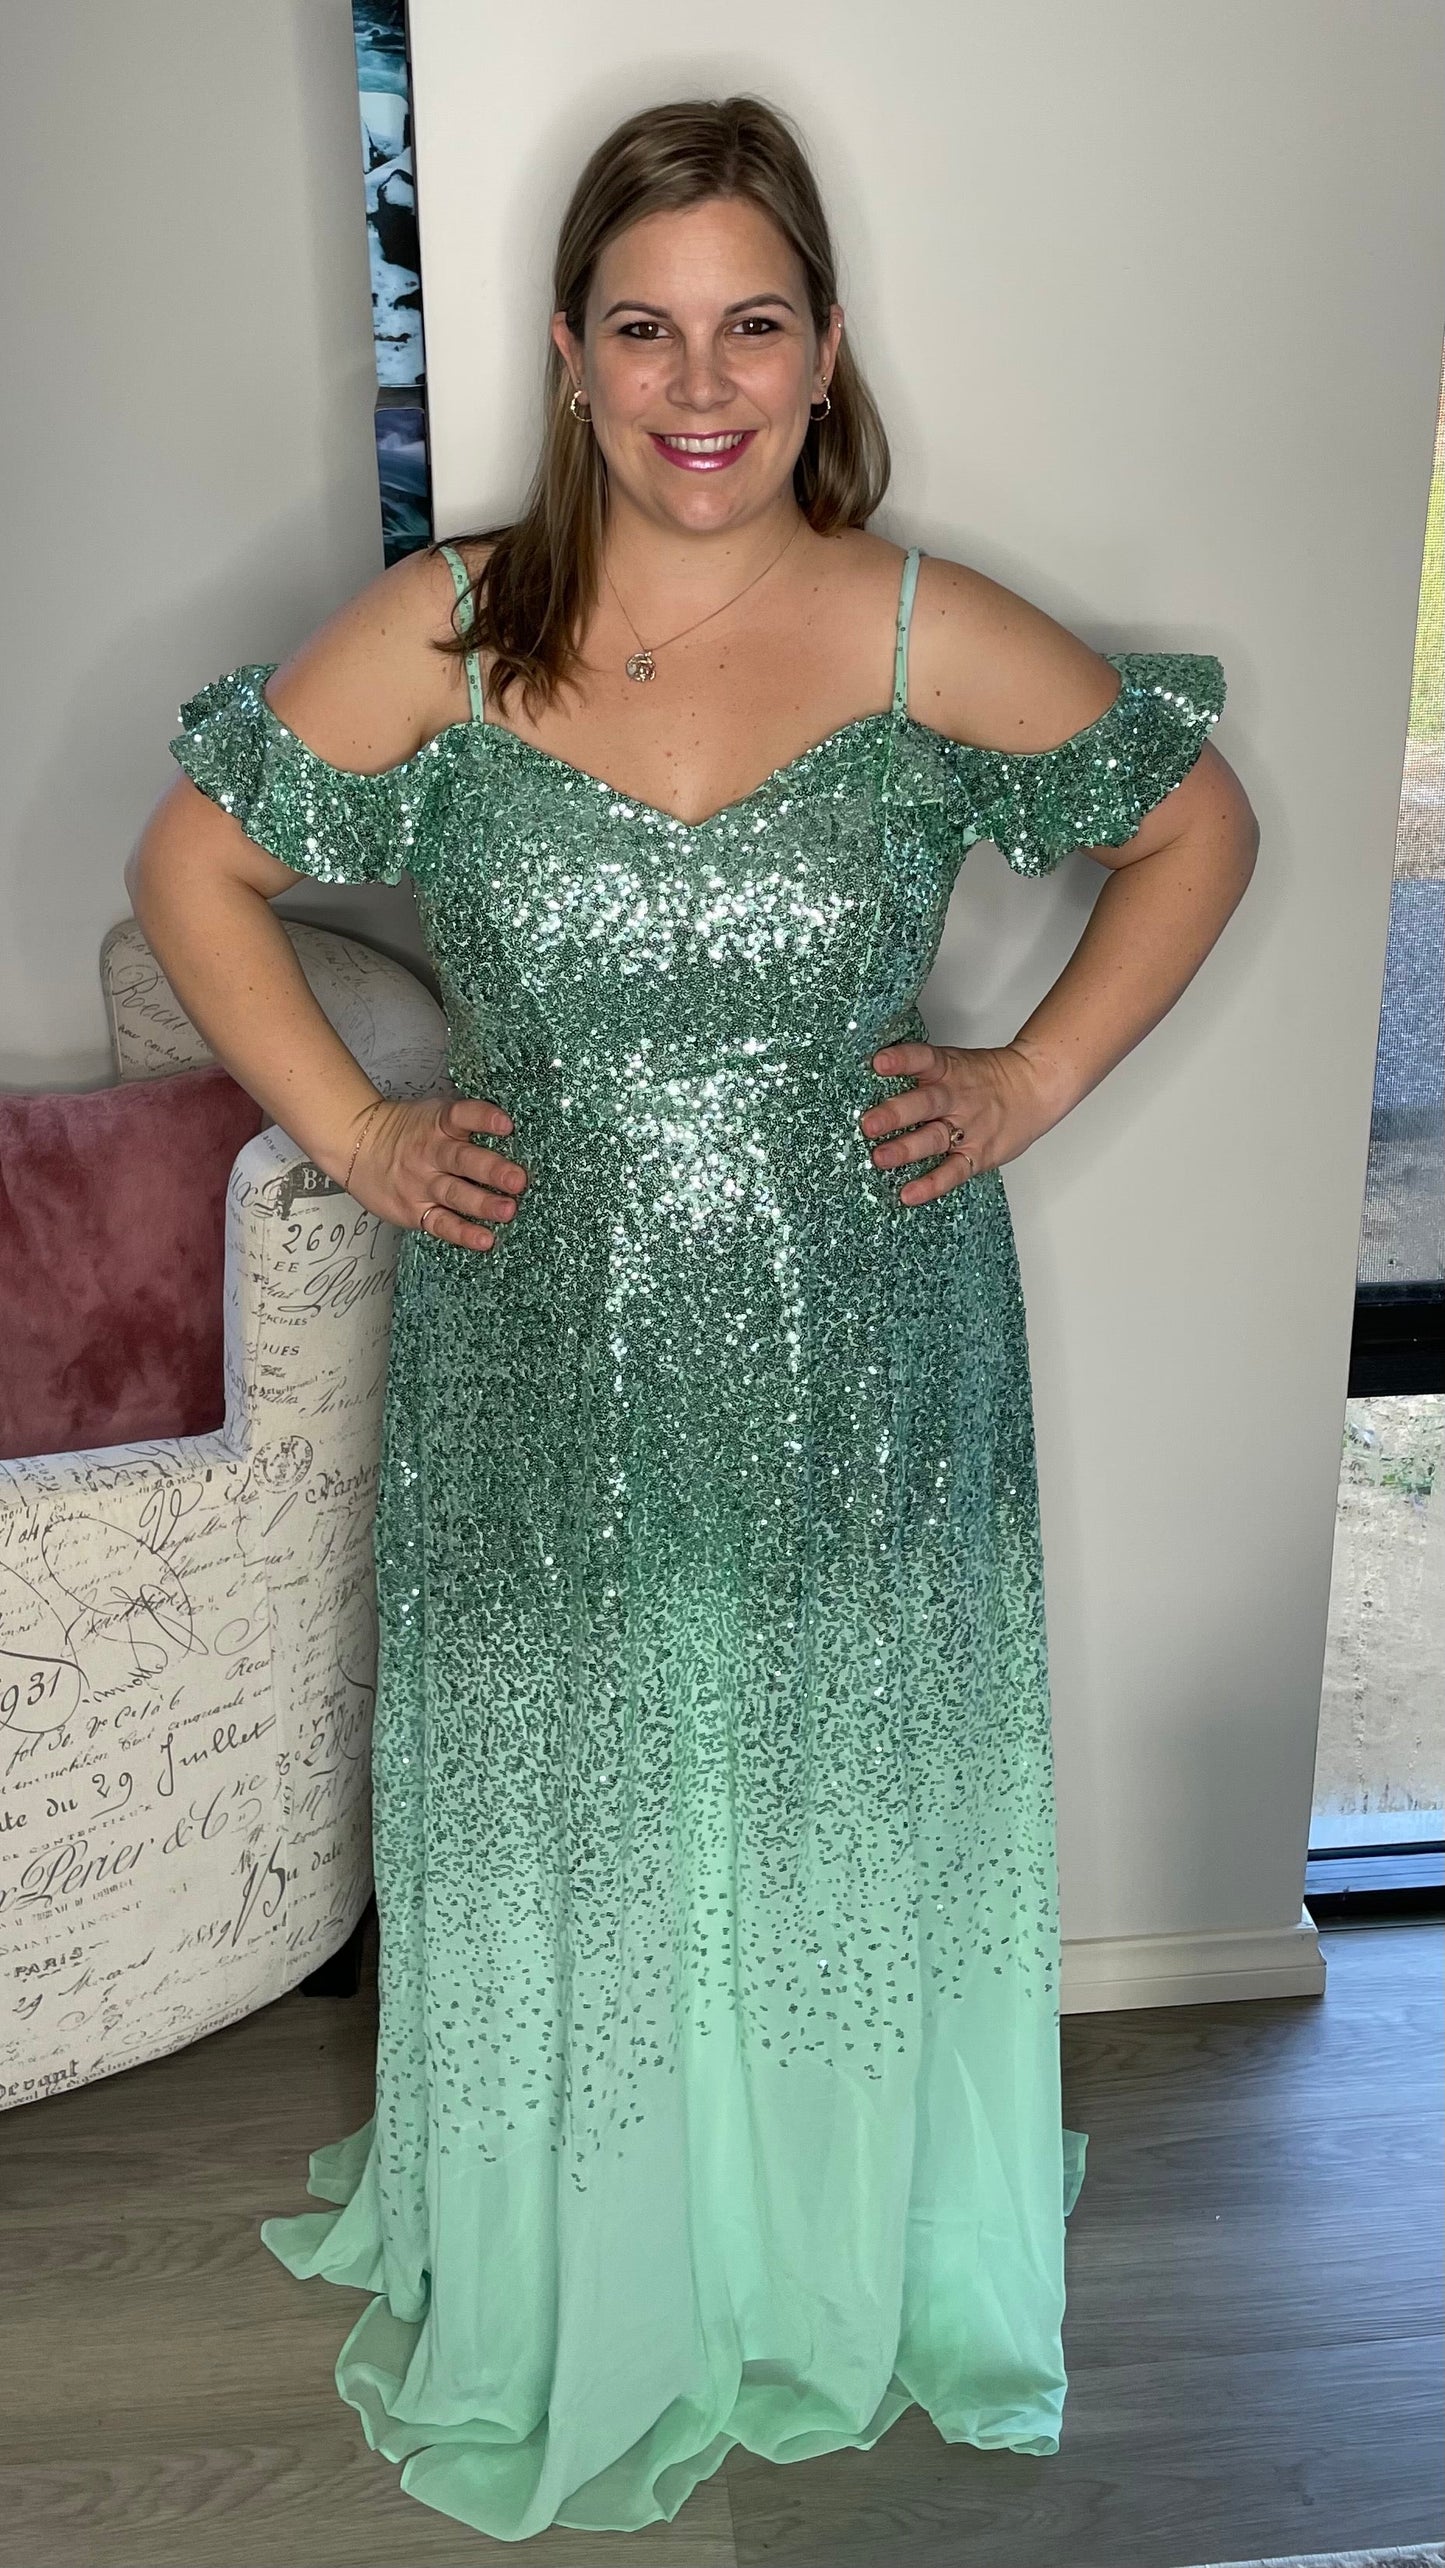 Belle Sequin Chiffon Gown | Goddiva | 
The Belle Dress is aptly named, because when wearing it, you surely will be Belle of the Ball. This sequin and chiffon dress will make you feel like a fairy princes